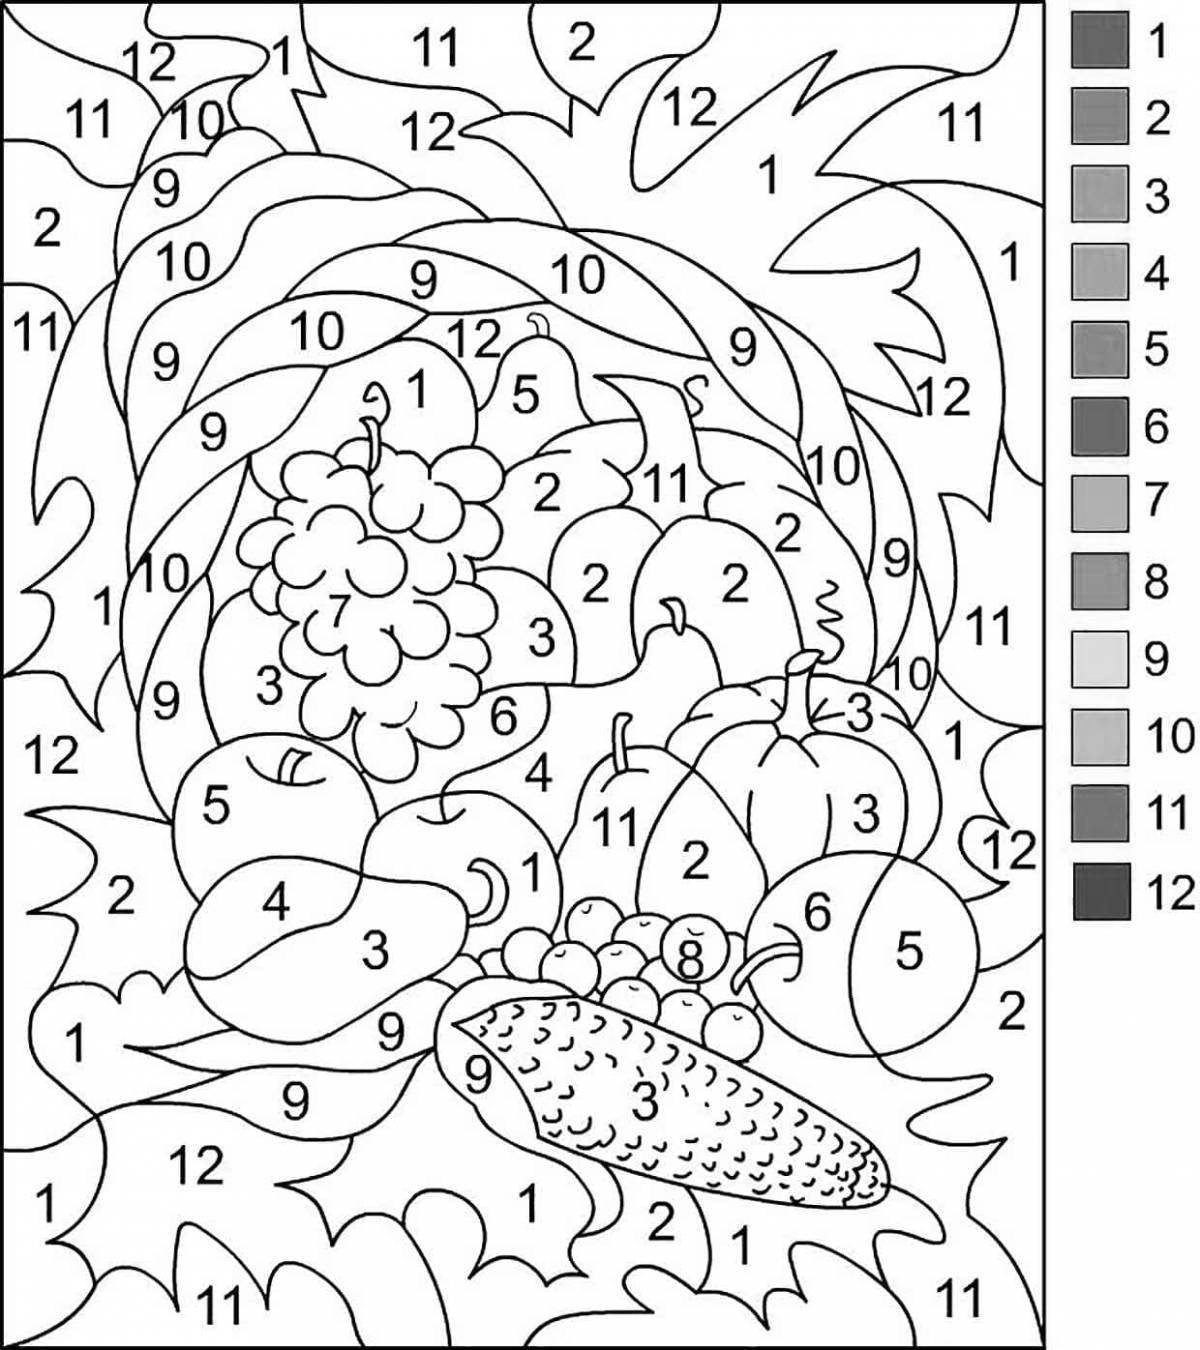 Magic 6 years by numbers coloring book